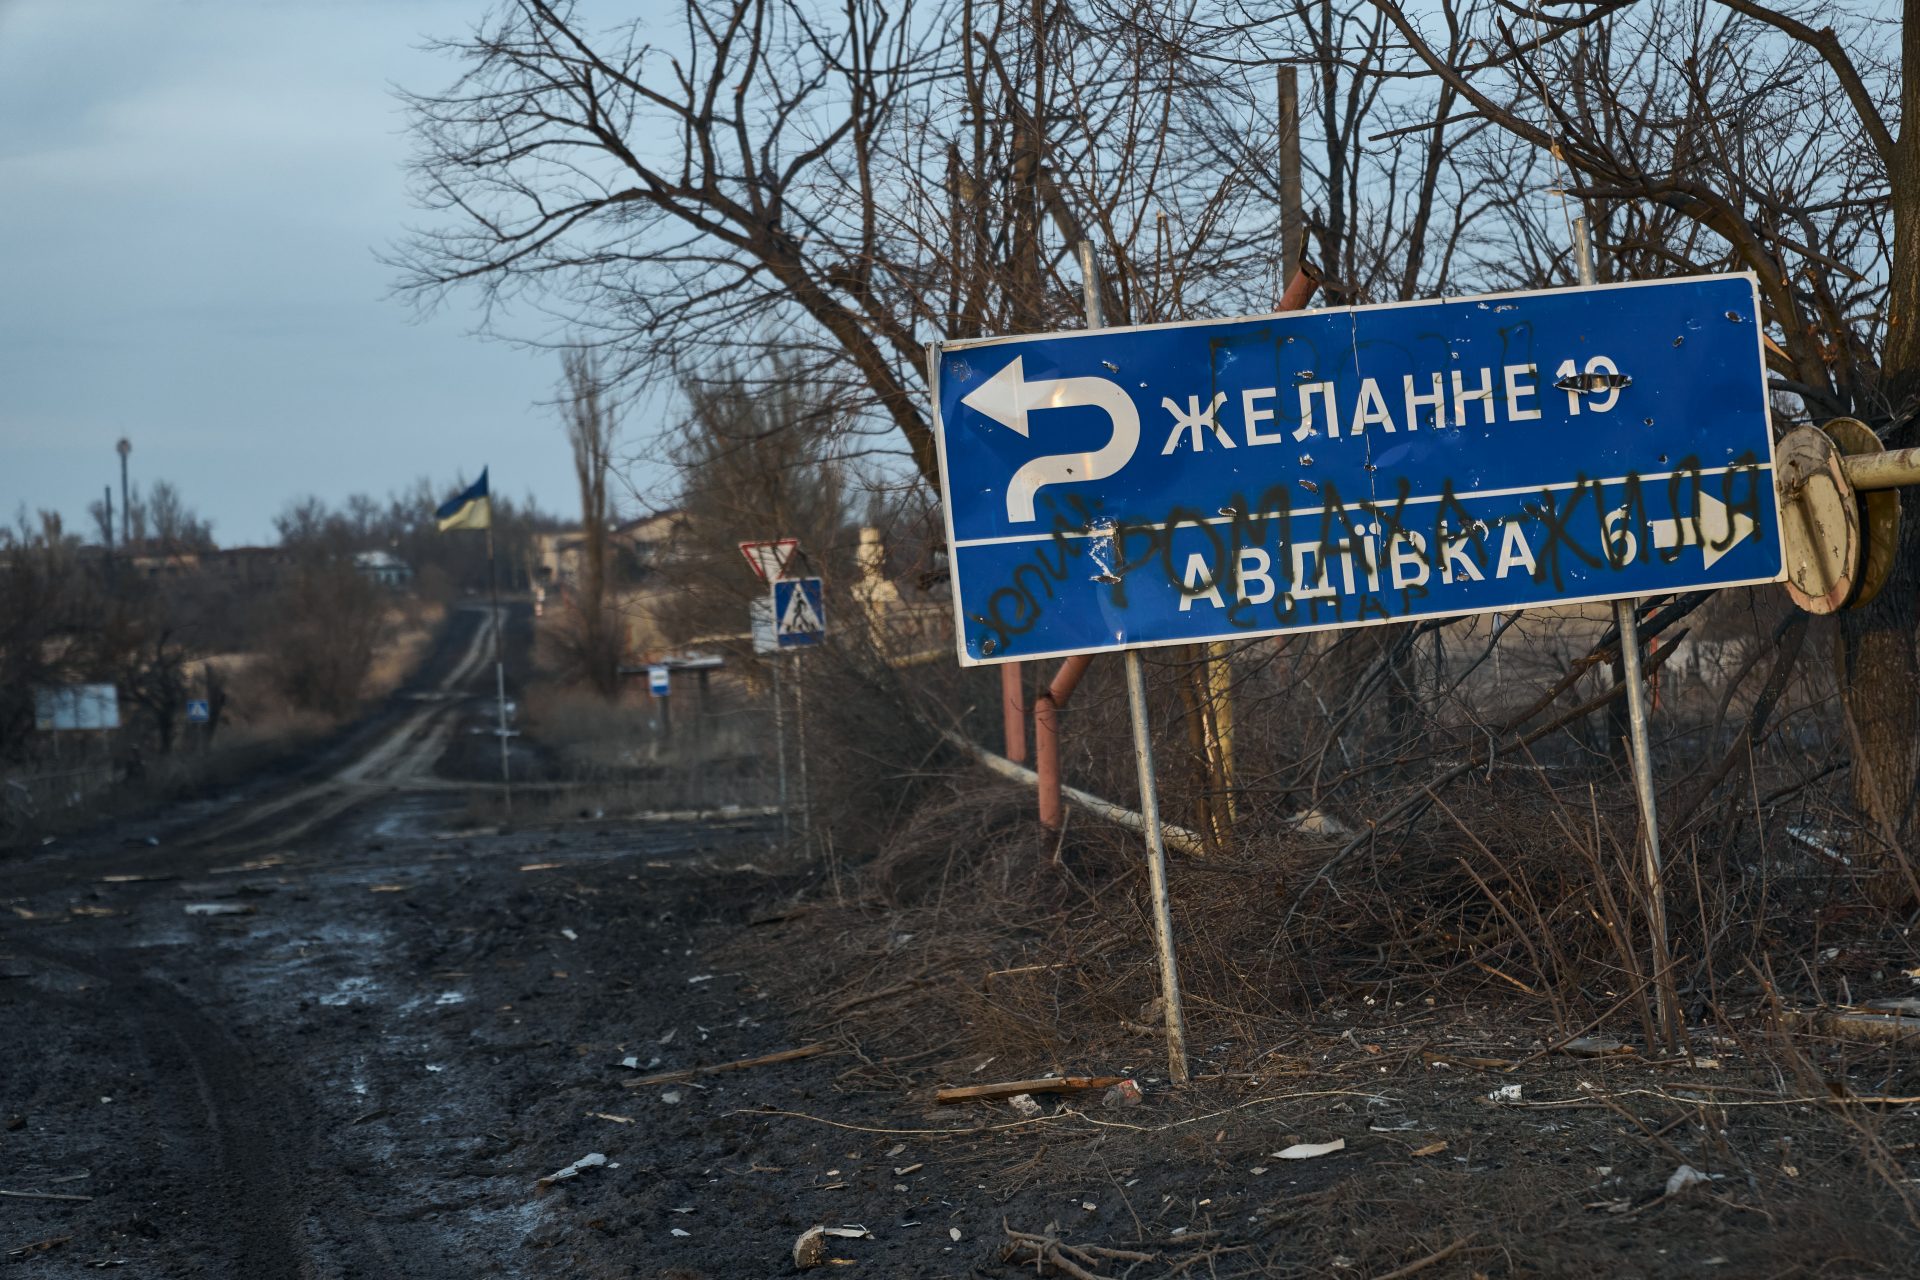 Avdiivka was Russia’s focus for months 